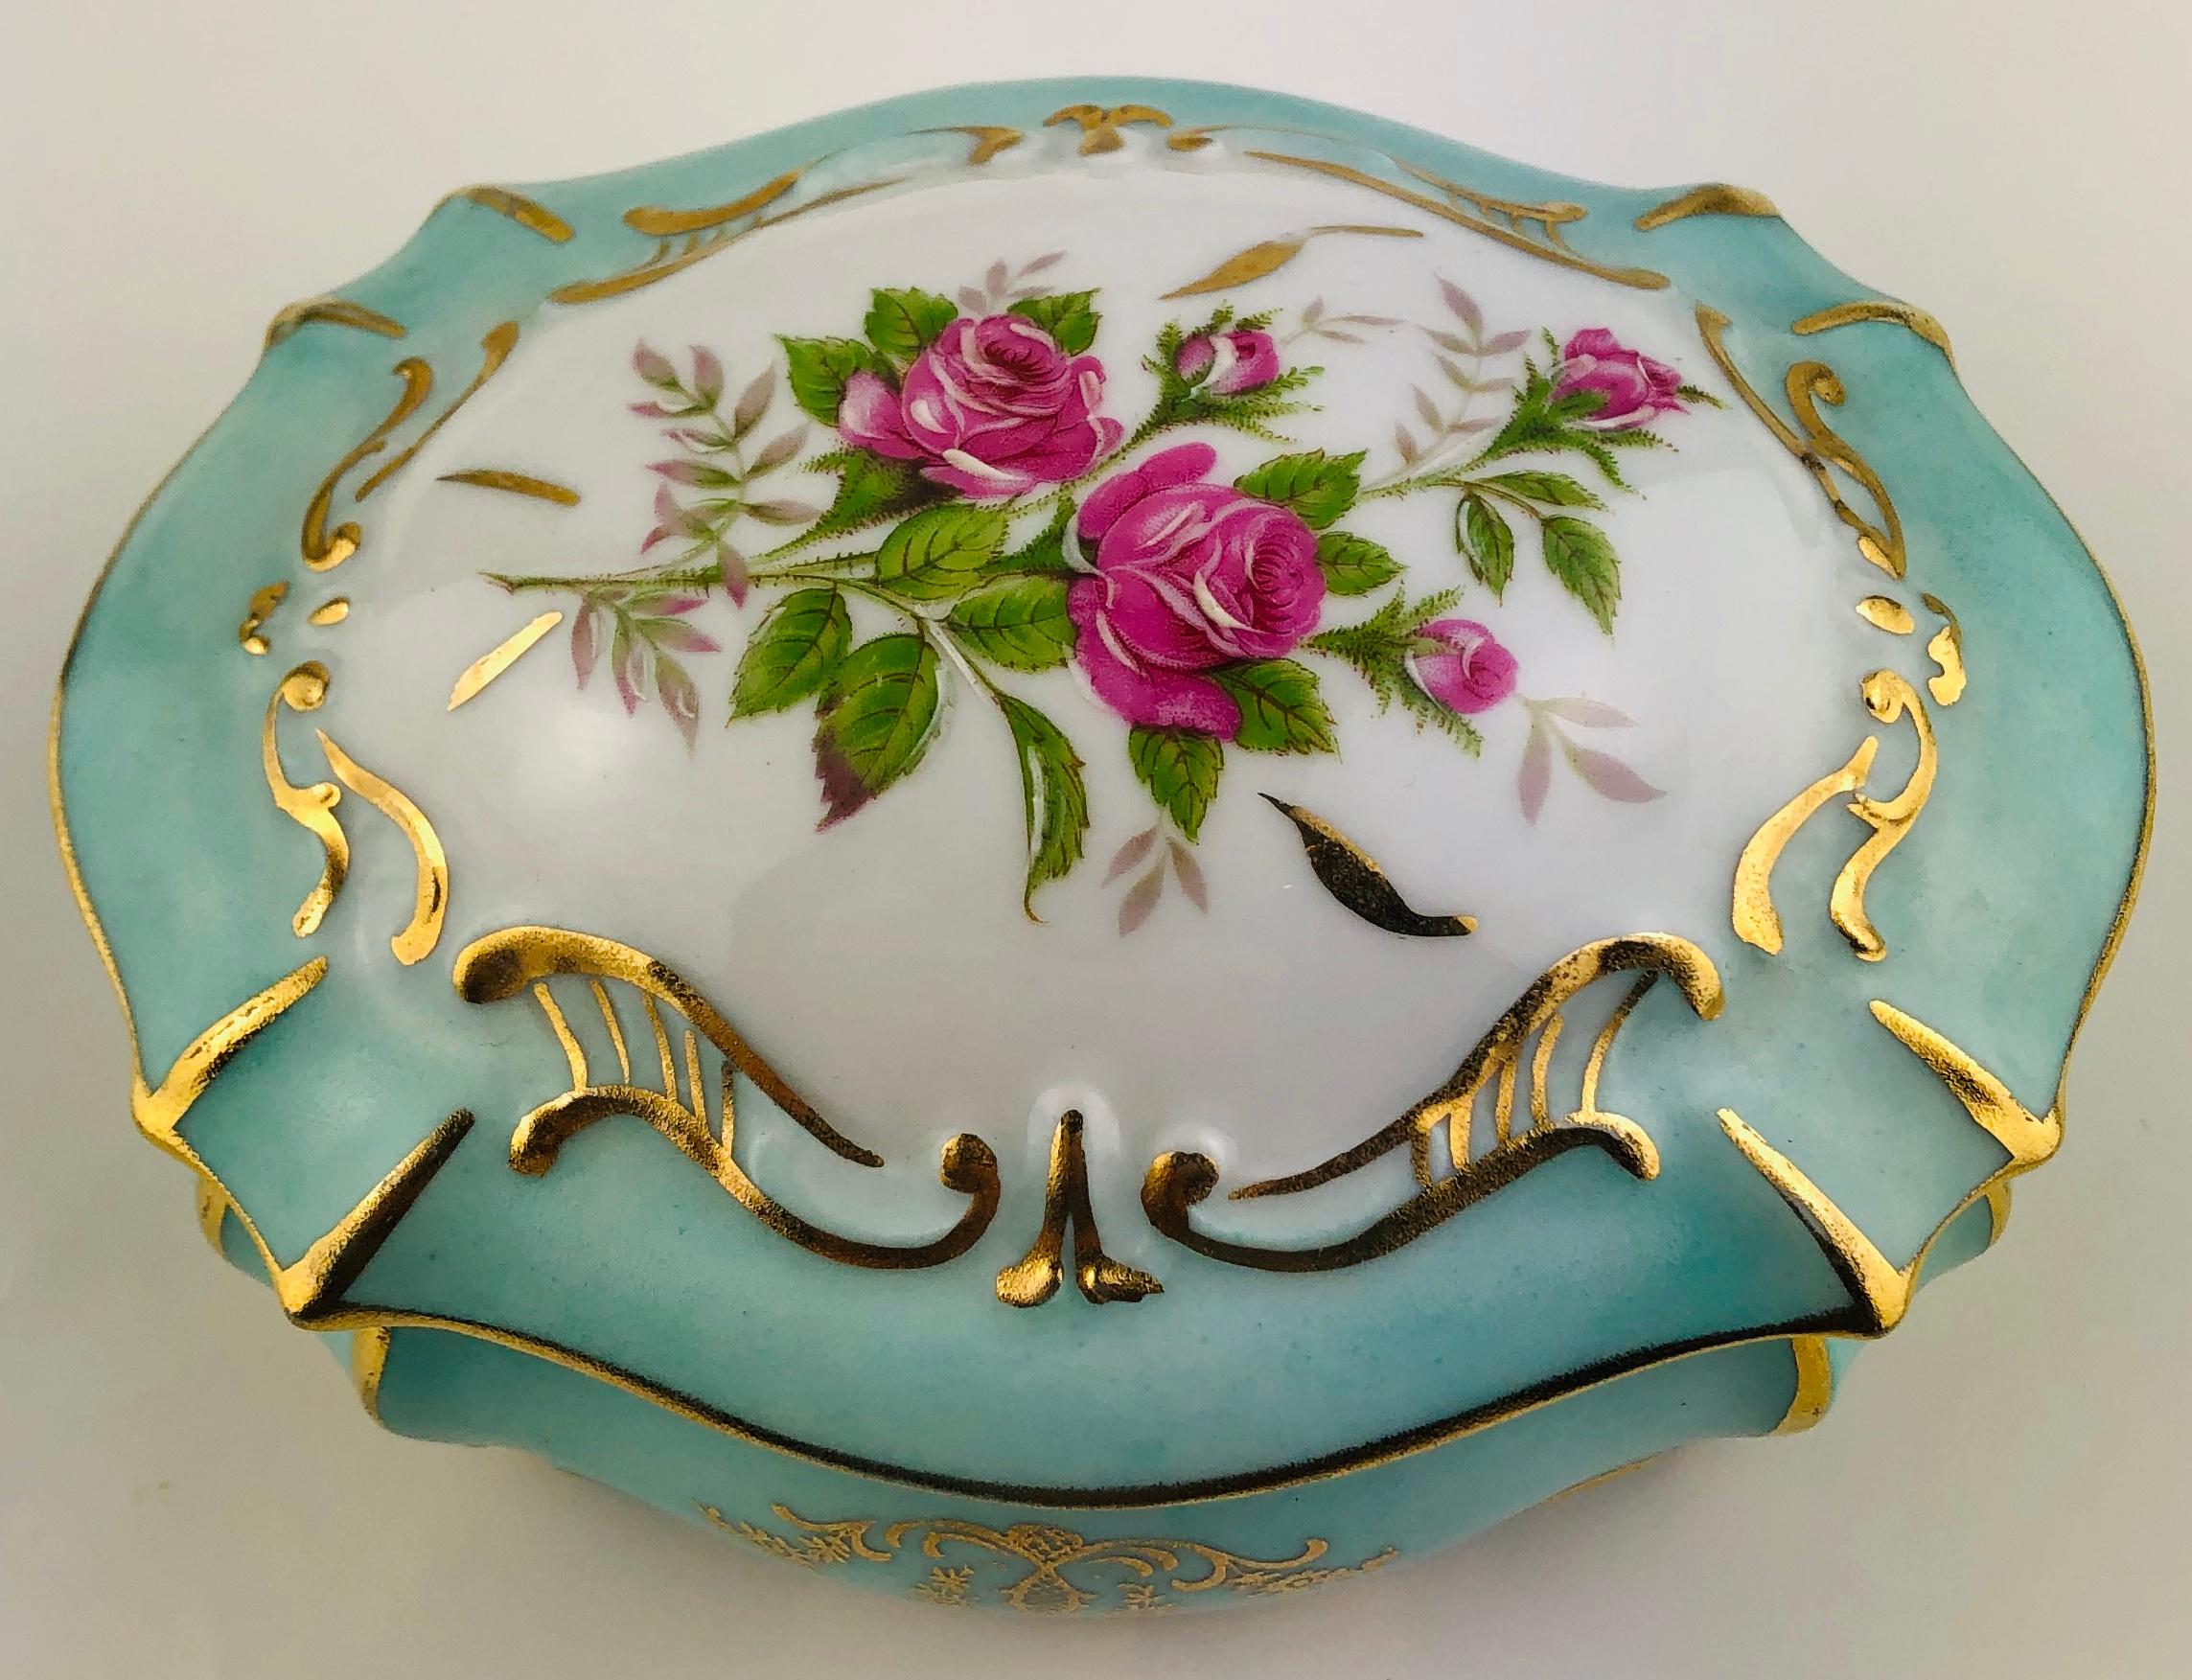 Art Deco Exquisite French Limoges Hand Painted Gold Trim Trinket or Jewelry Box